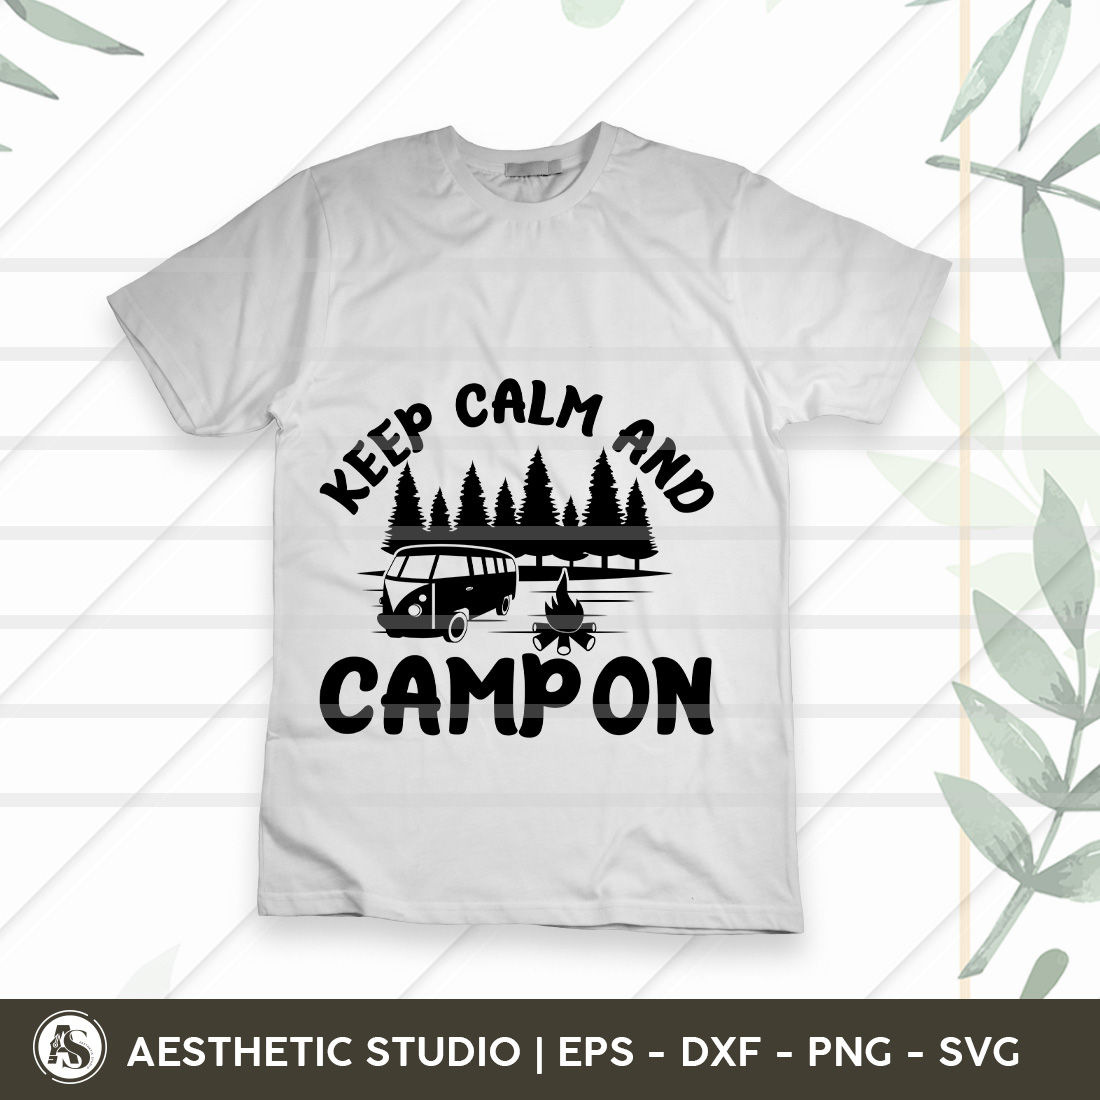 Keep Calm And Camp On, Camper, Adventure, Camp Life, Camping Svg, Typography, Camping Quotes, Camping Cut File, Funny Camping, Camping T-shirt Design, Svg, Eps, Dxf, Png, Cut file preview image.